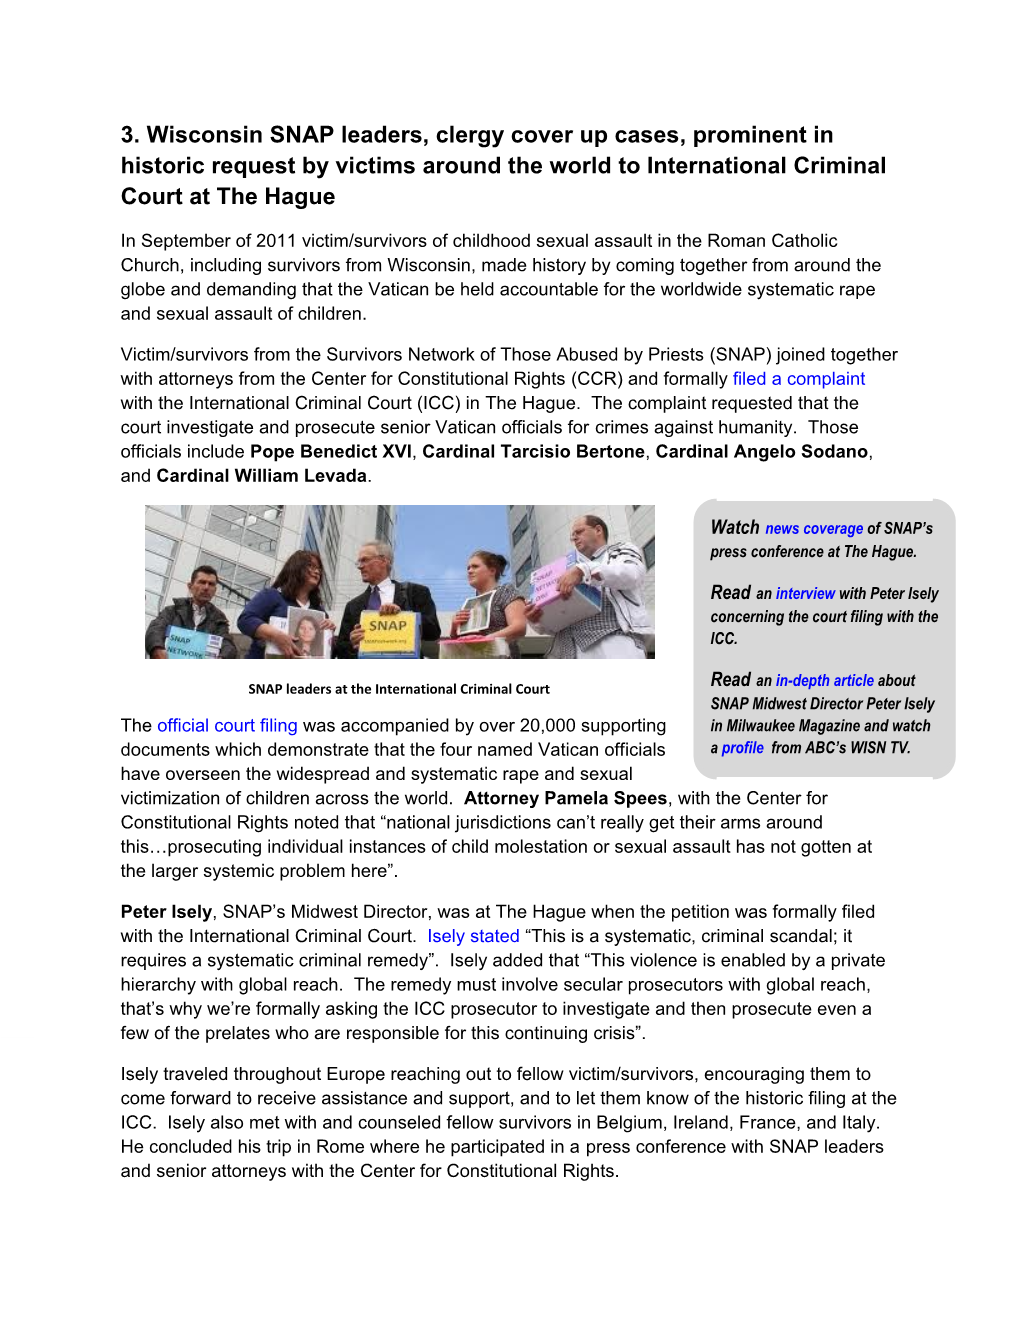 3. Wisconsin SNAP Leaders, Clergy Cover up Cases, Prominent in Historic Request by Victims Around the World to International Criminal Court at the Hague